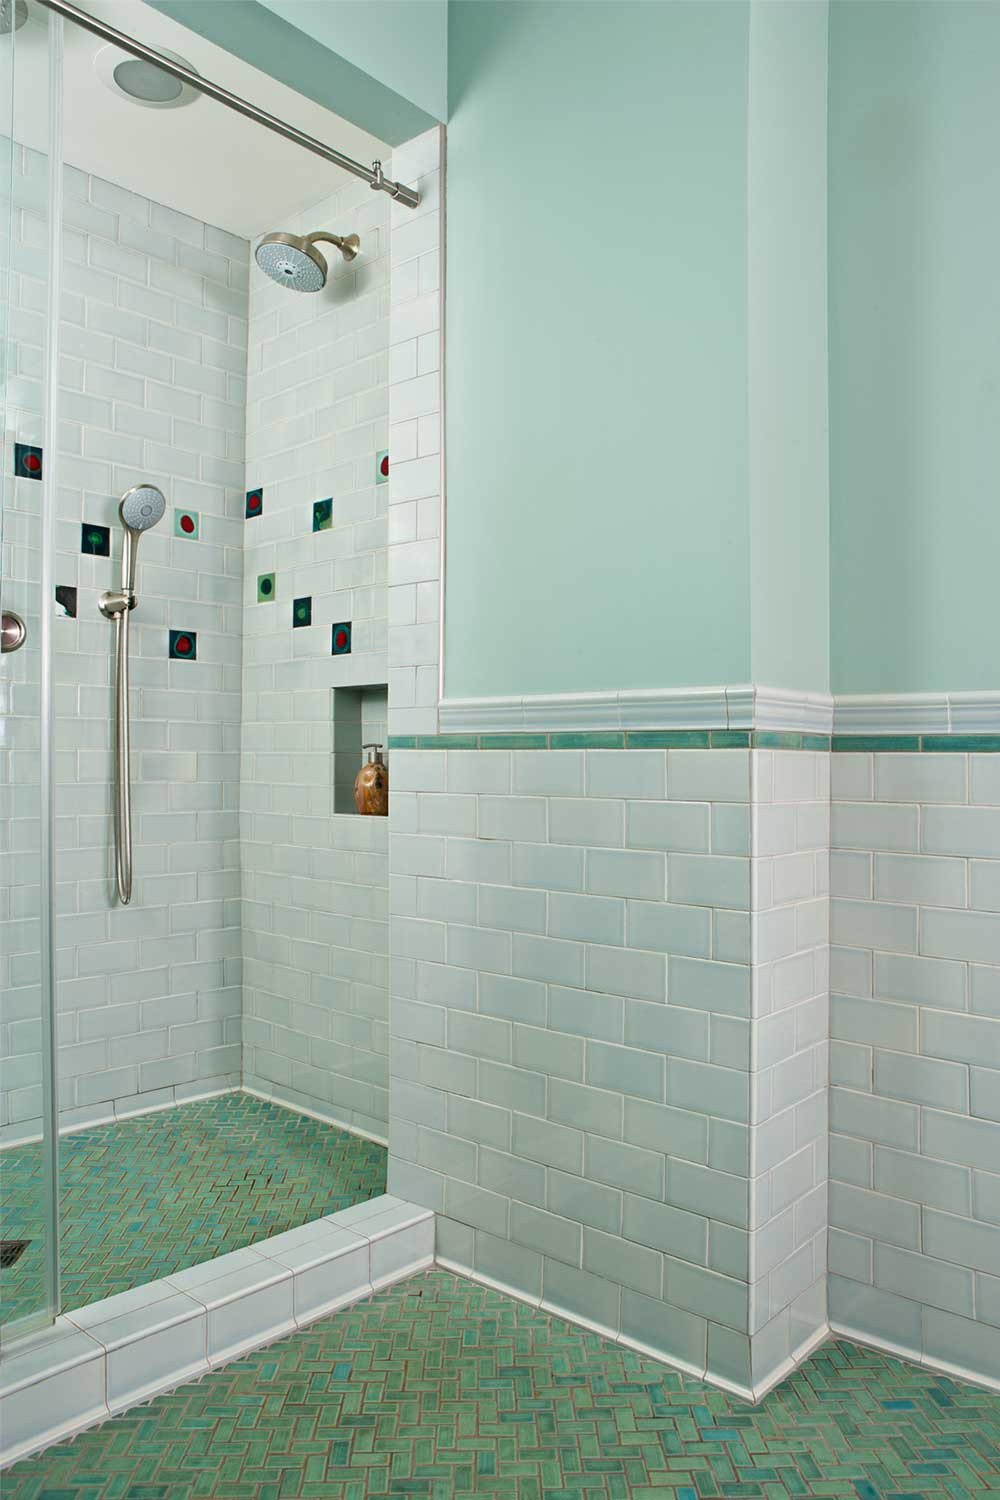 Bathroom Tiles Pictures
 Skyline Mid Century Tile Bathroom Mixing Historic and